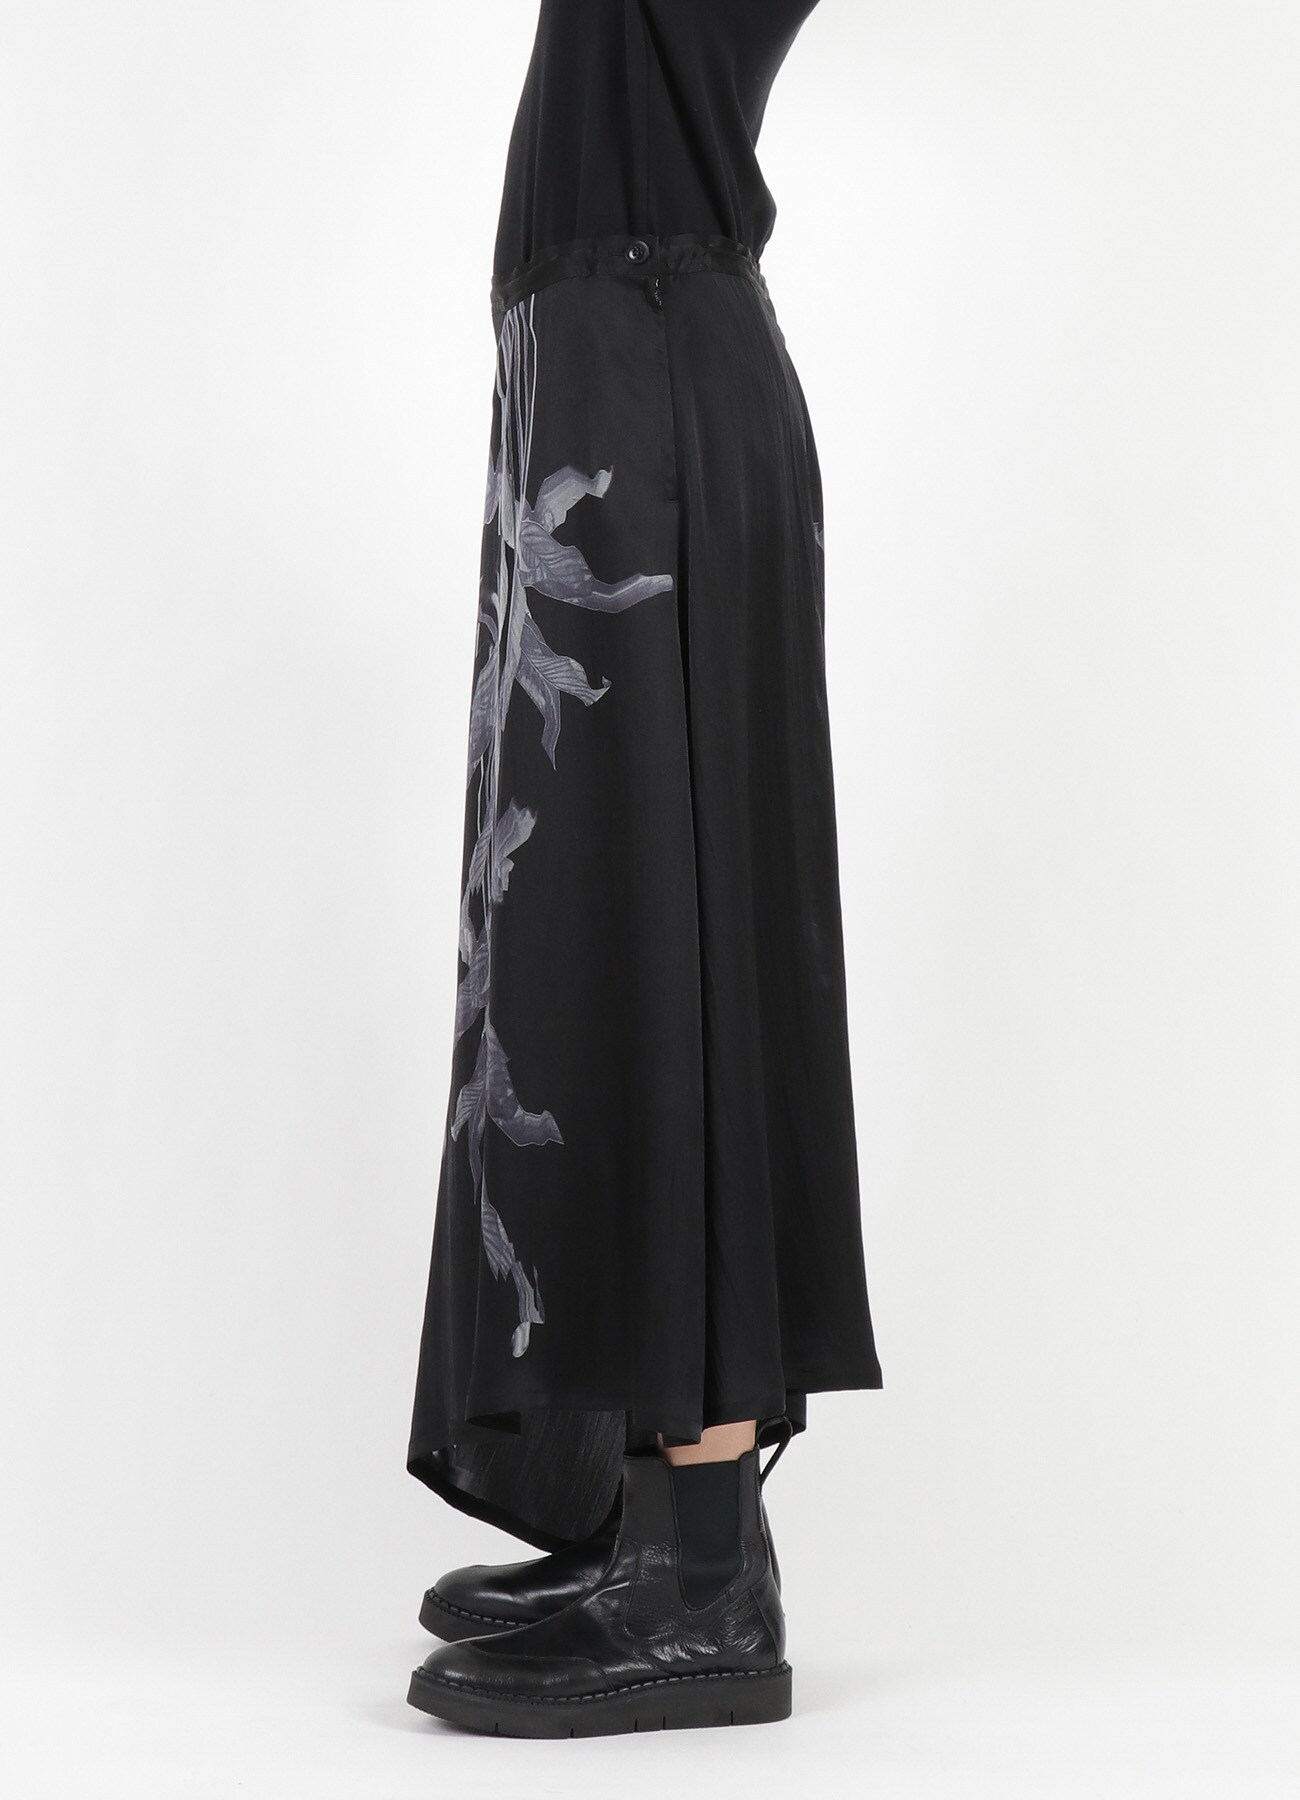 【LES ARTS GRAPHIQUES】 12 MOMME Si/SATIN BANANA LEAVE RIGHT LAYER SKIRT